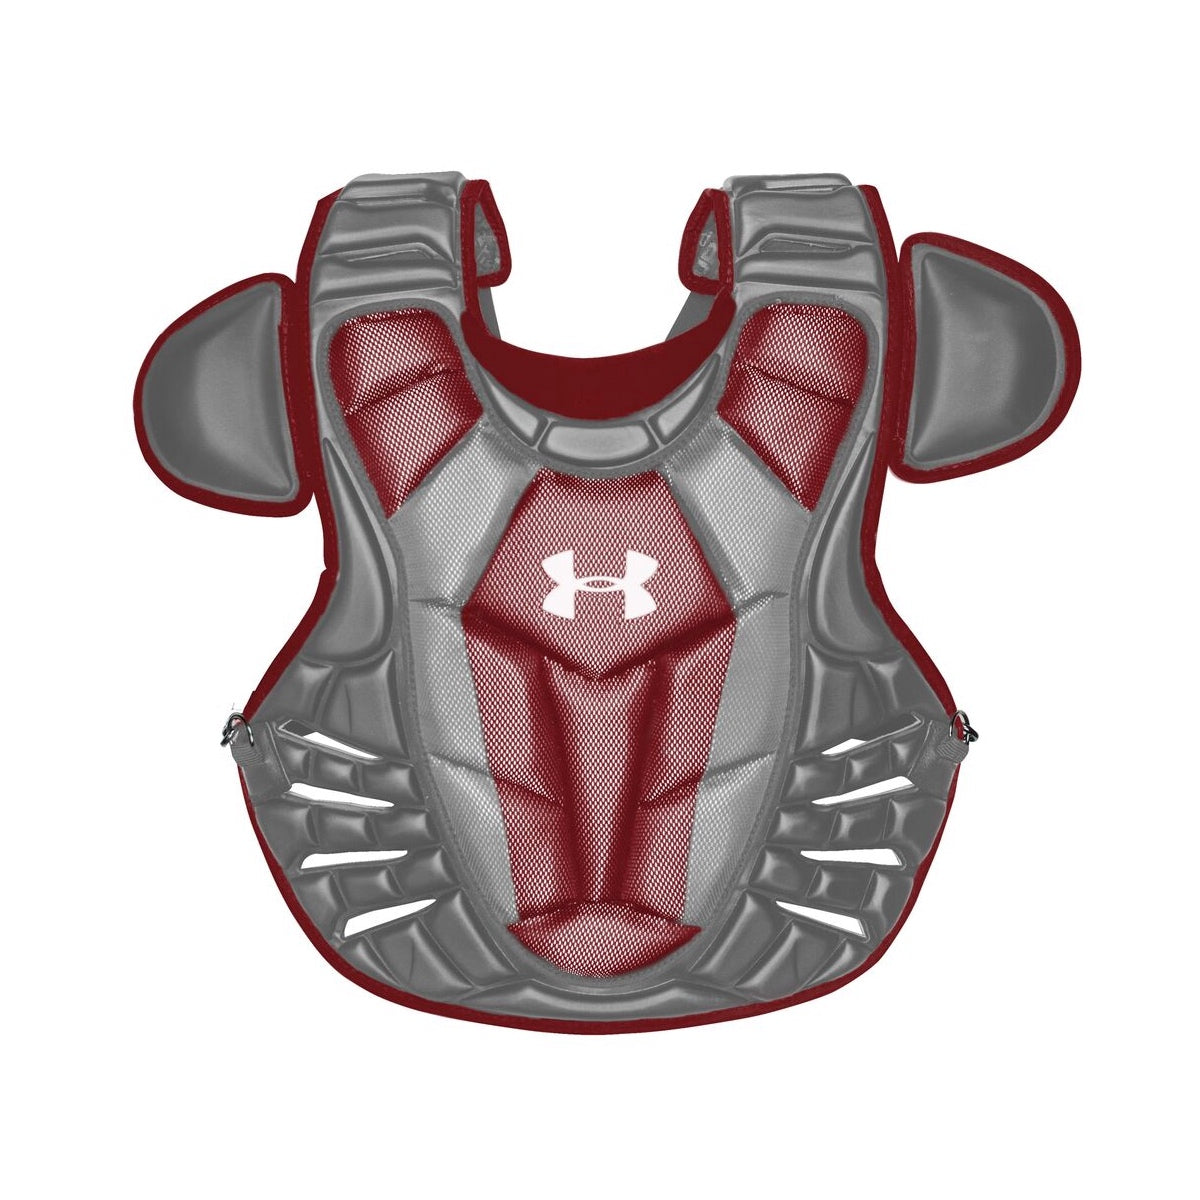 under-armour-converge-adult-pro-chest-protector-uacp3-ap